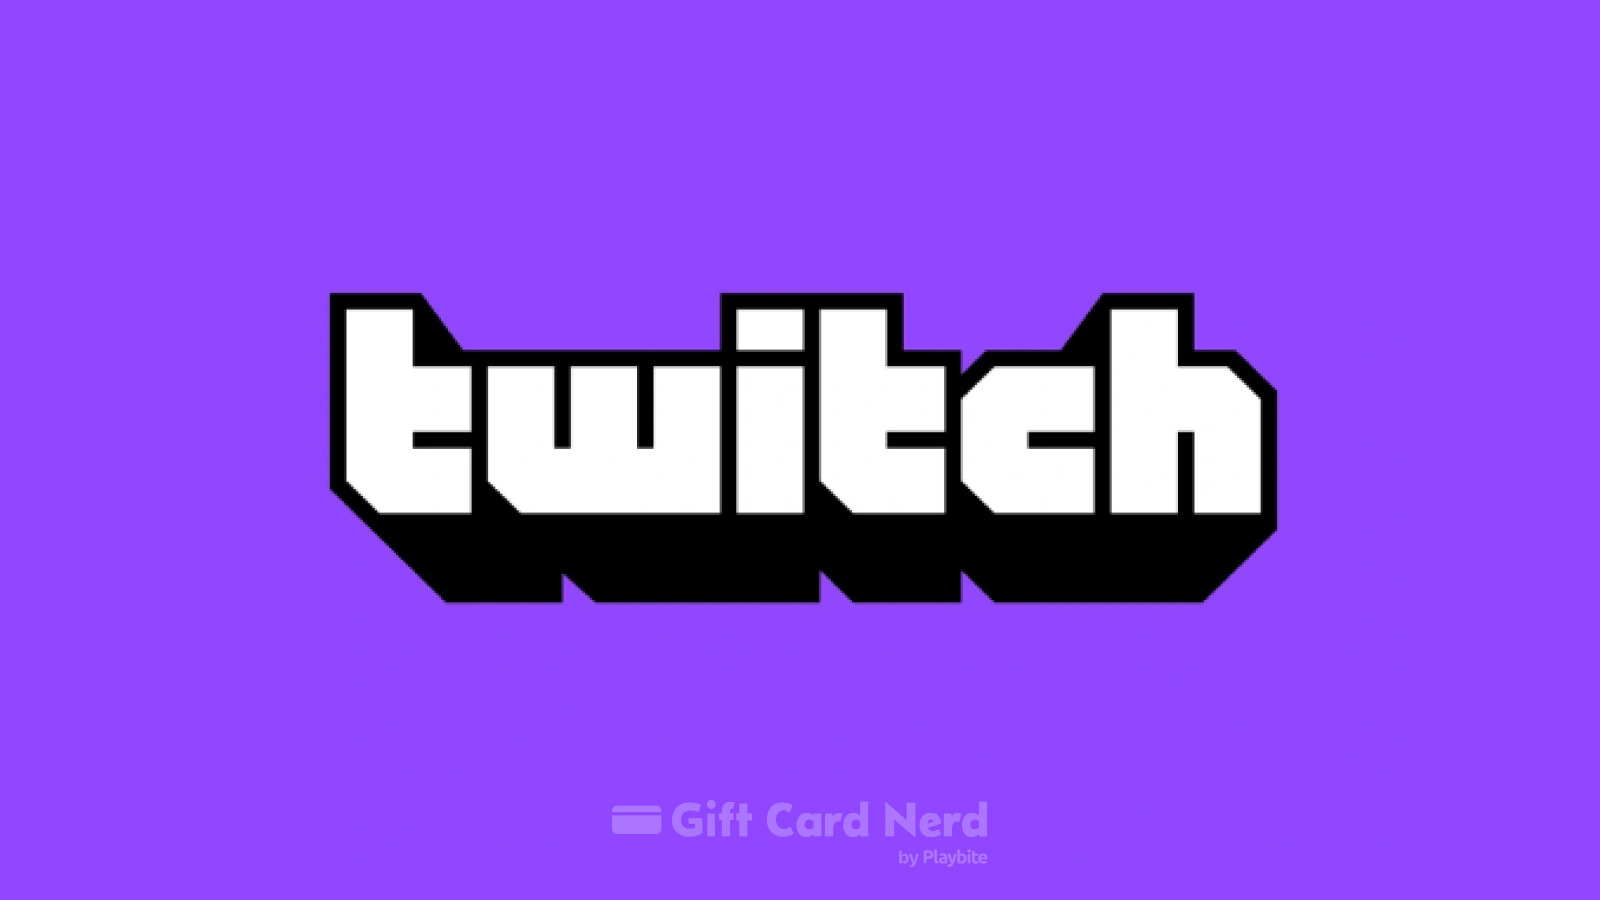 Does Game Stop Sell Twitch Gift Cards?